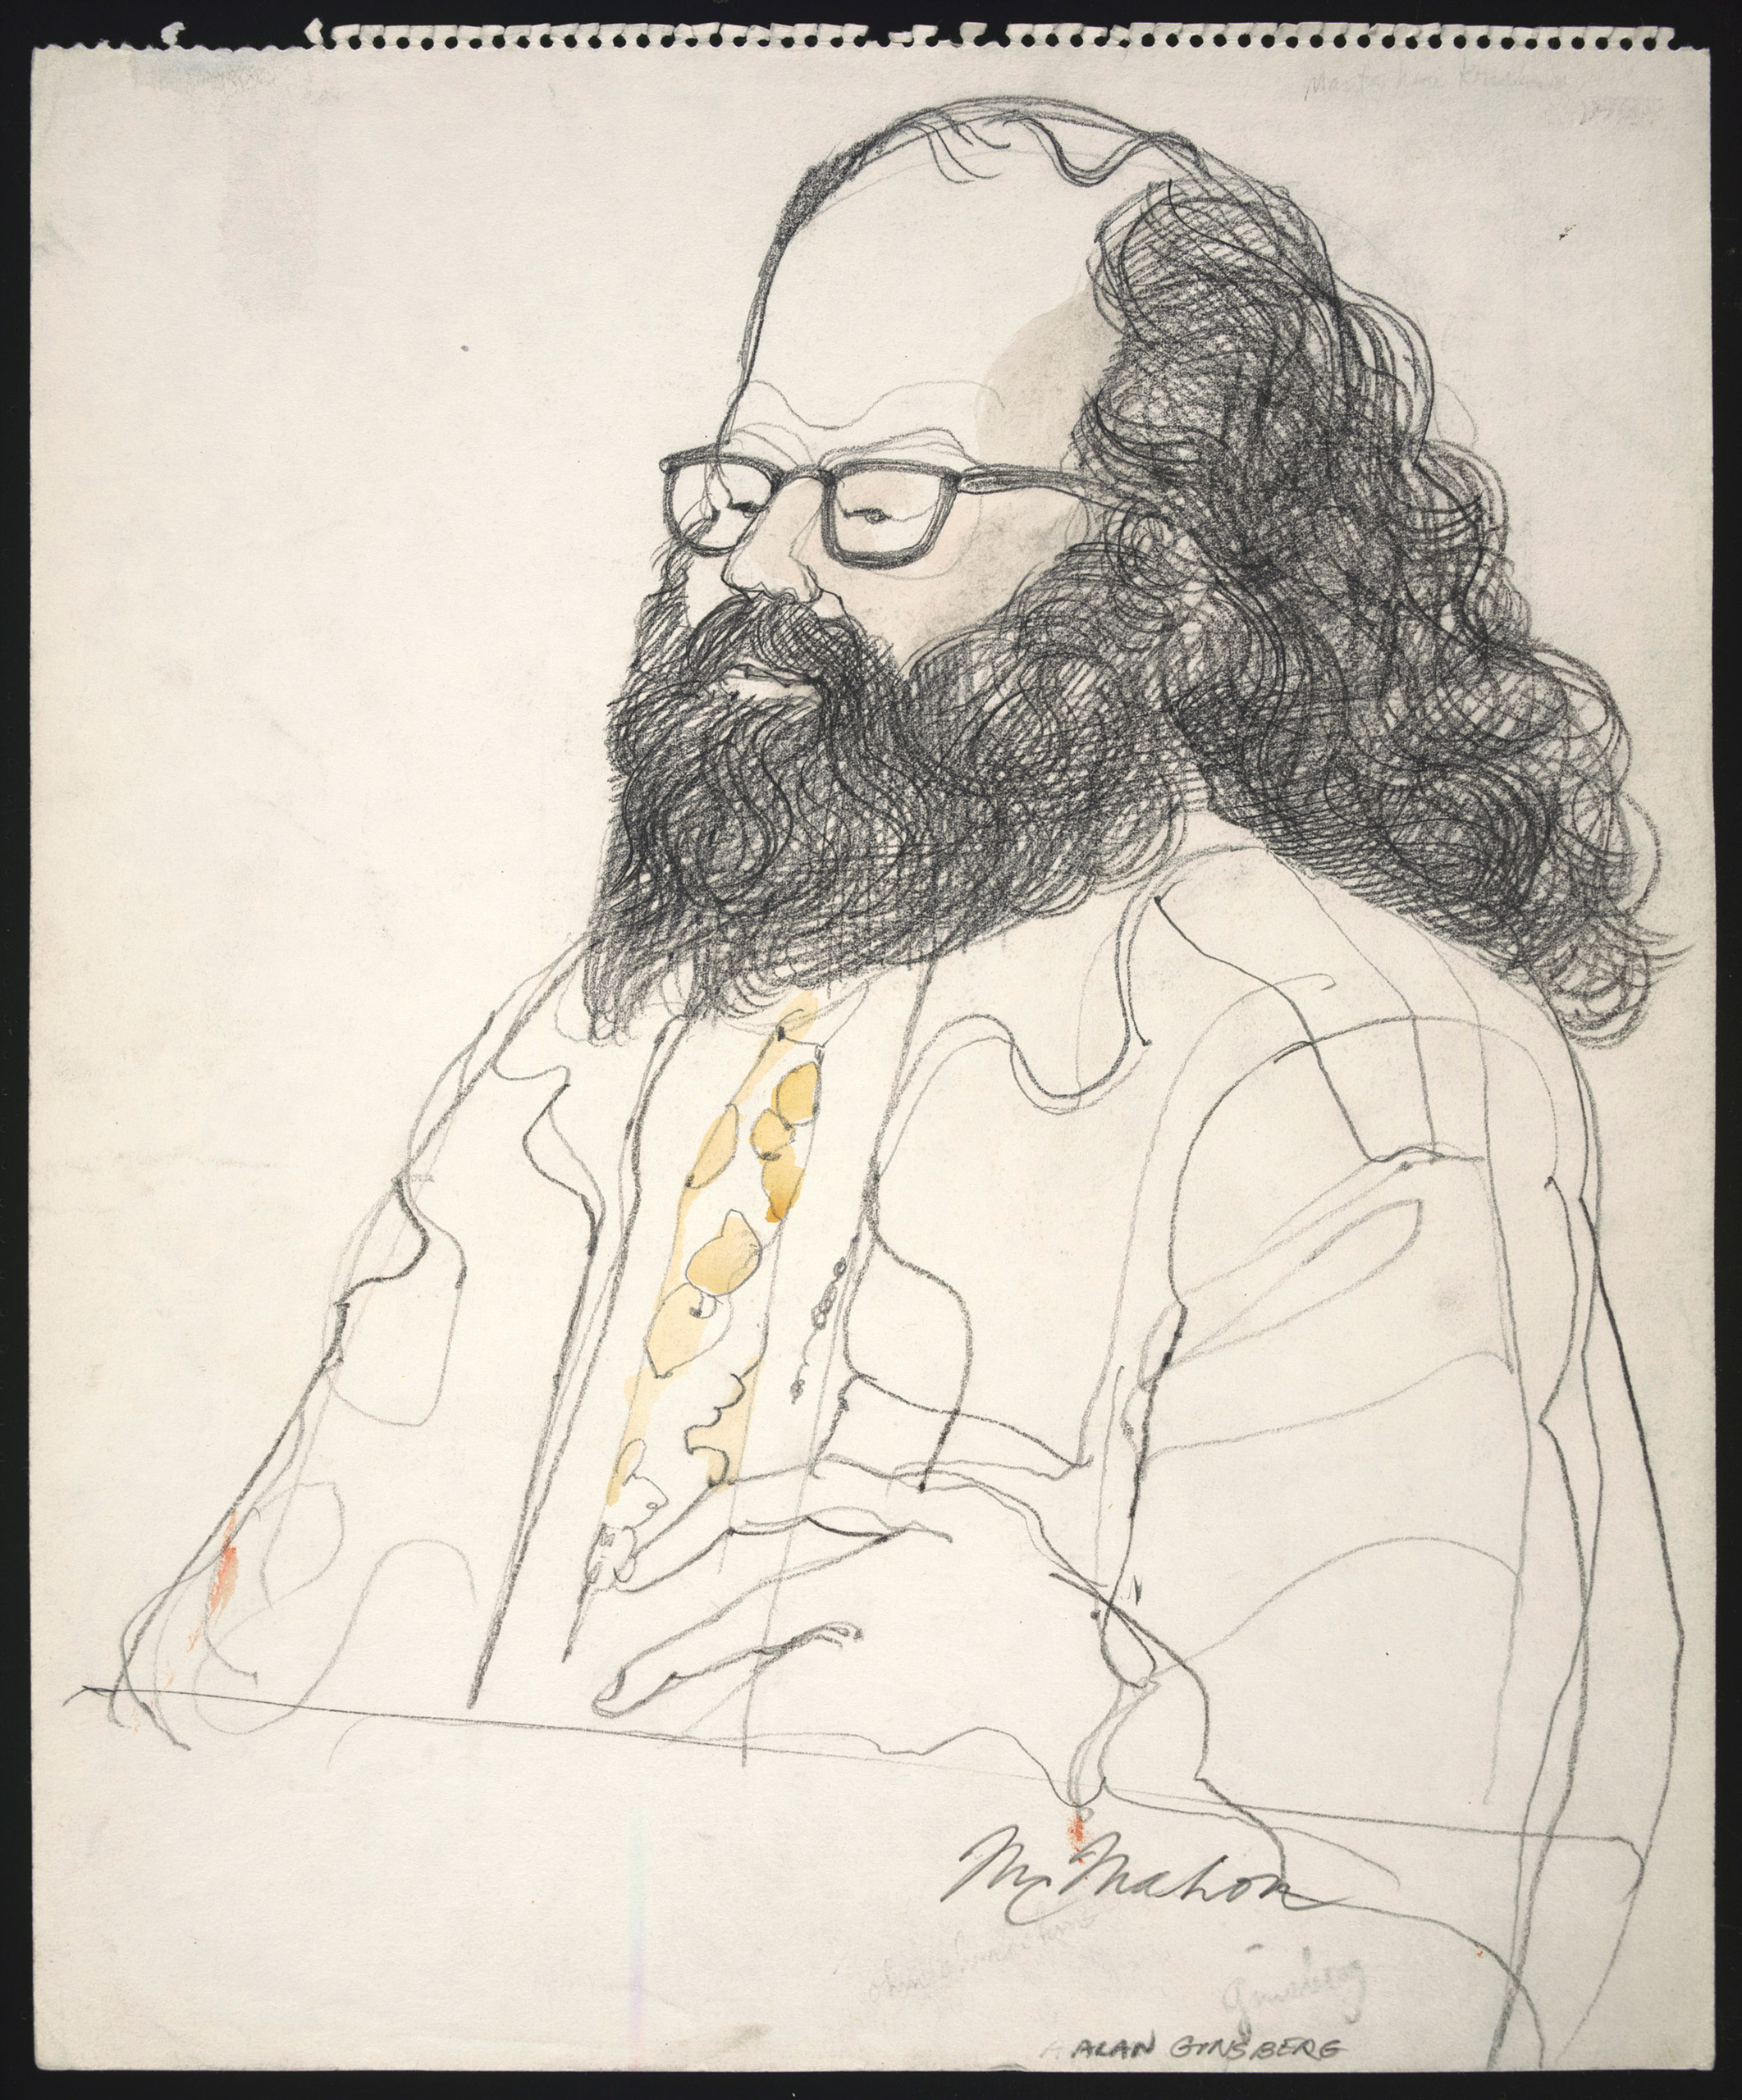 American Poet Allen Ginsberg testifies during the trial of the Chicago Eight in Chicago in 1969. After a trial resulting in both acquittals and convictions, followed by appeals, reversals, and retrials, there were some final convictions of the other seven, but none of them were ultimately sentenced to jail or fines.